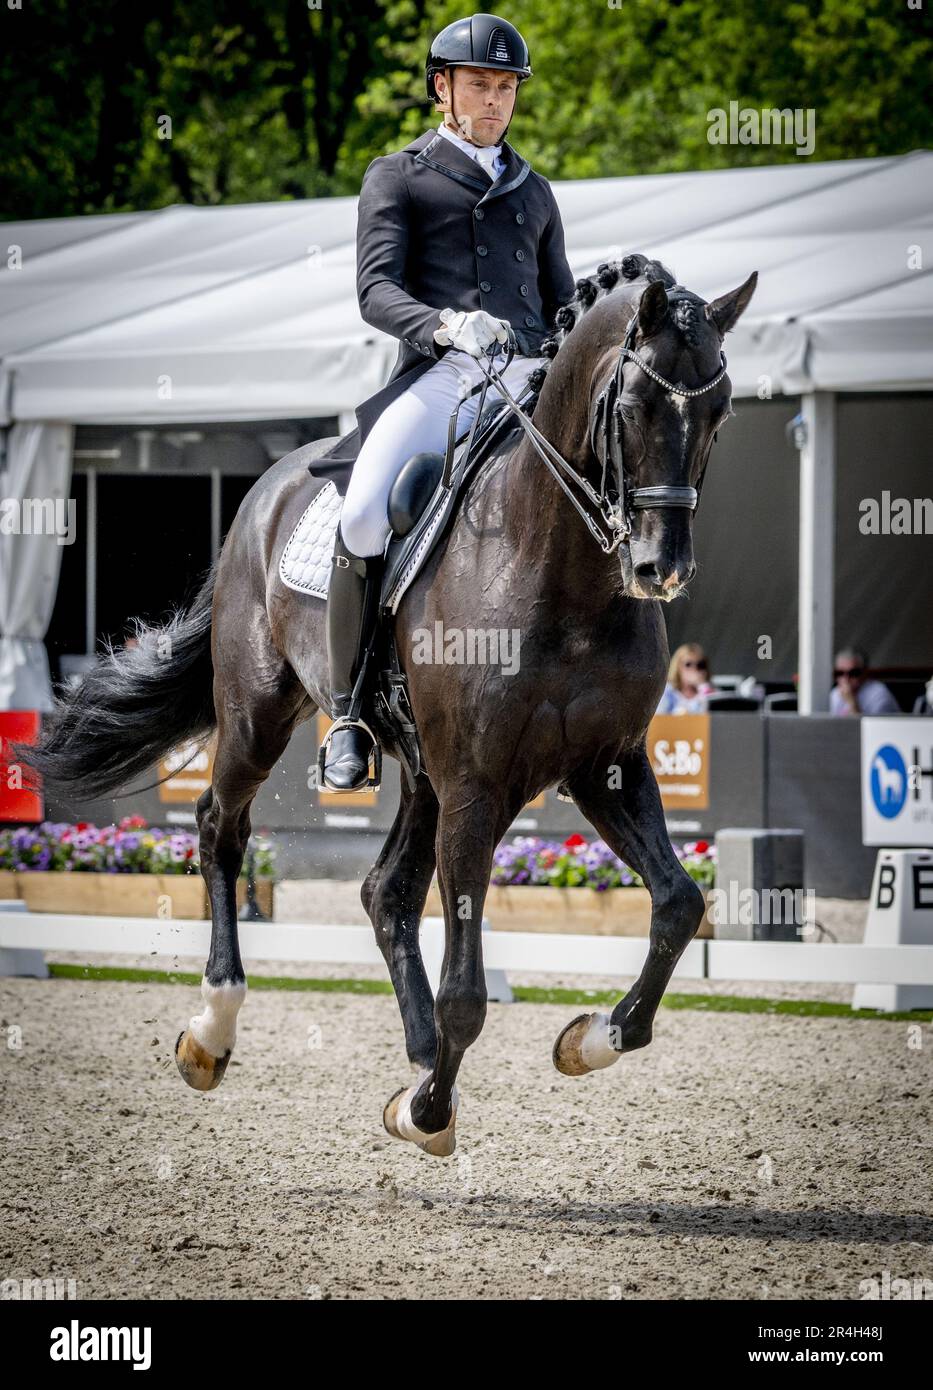 ERMELO - Laurens van Lieren with Dutch Design in action during the final of the Heavy Tour Freestyle at the NK Dressage. ANP ROBIN UTRECHT netherlands out - belgium out Stock Photo